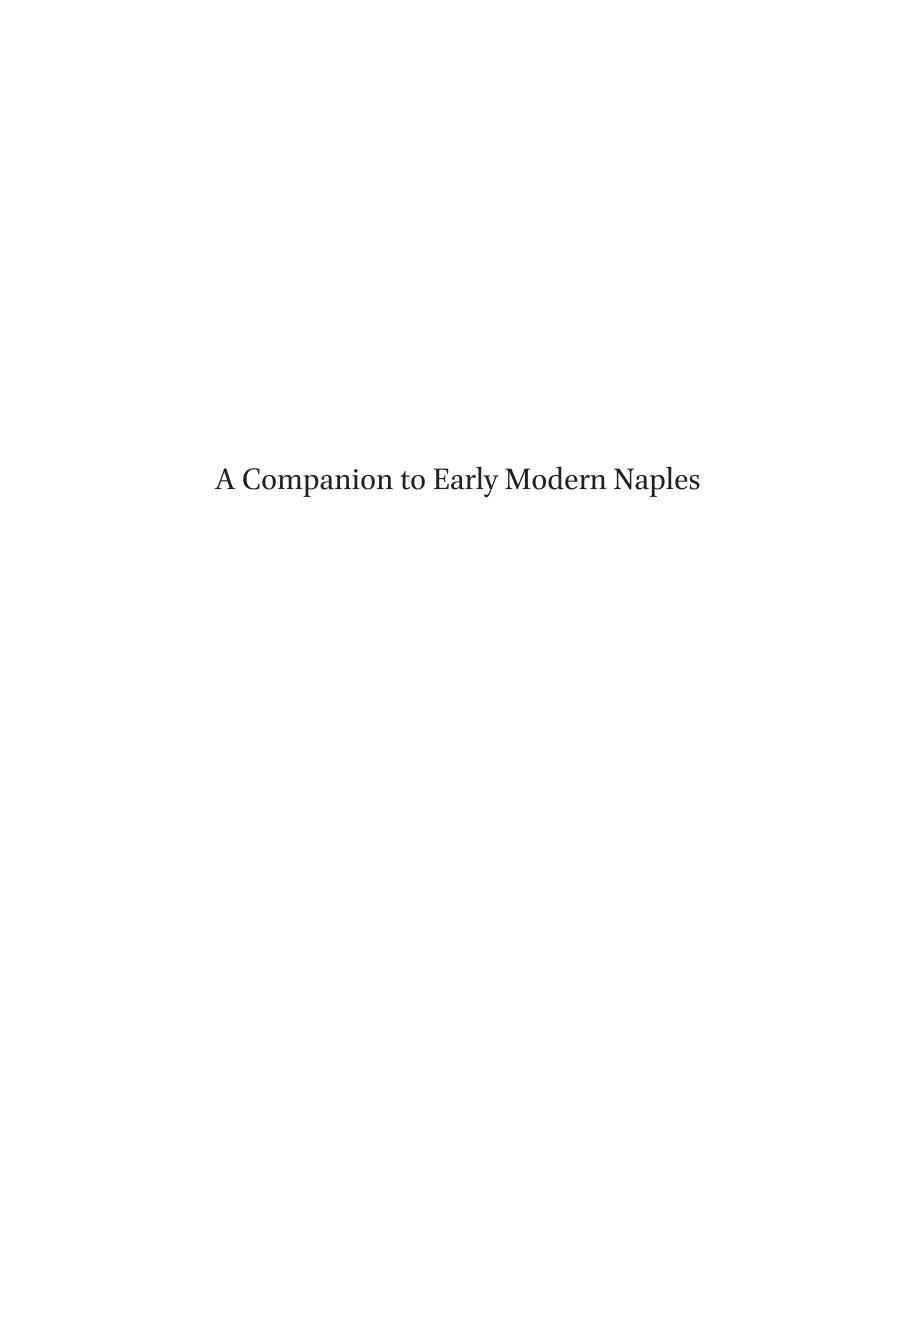 A Companion to Early Modern Naples